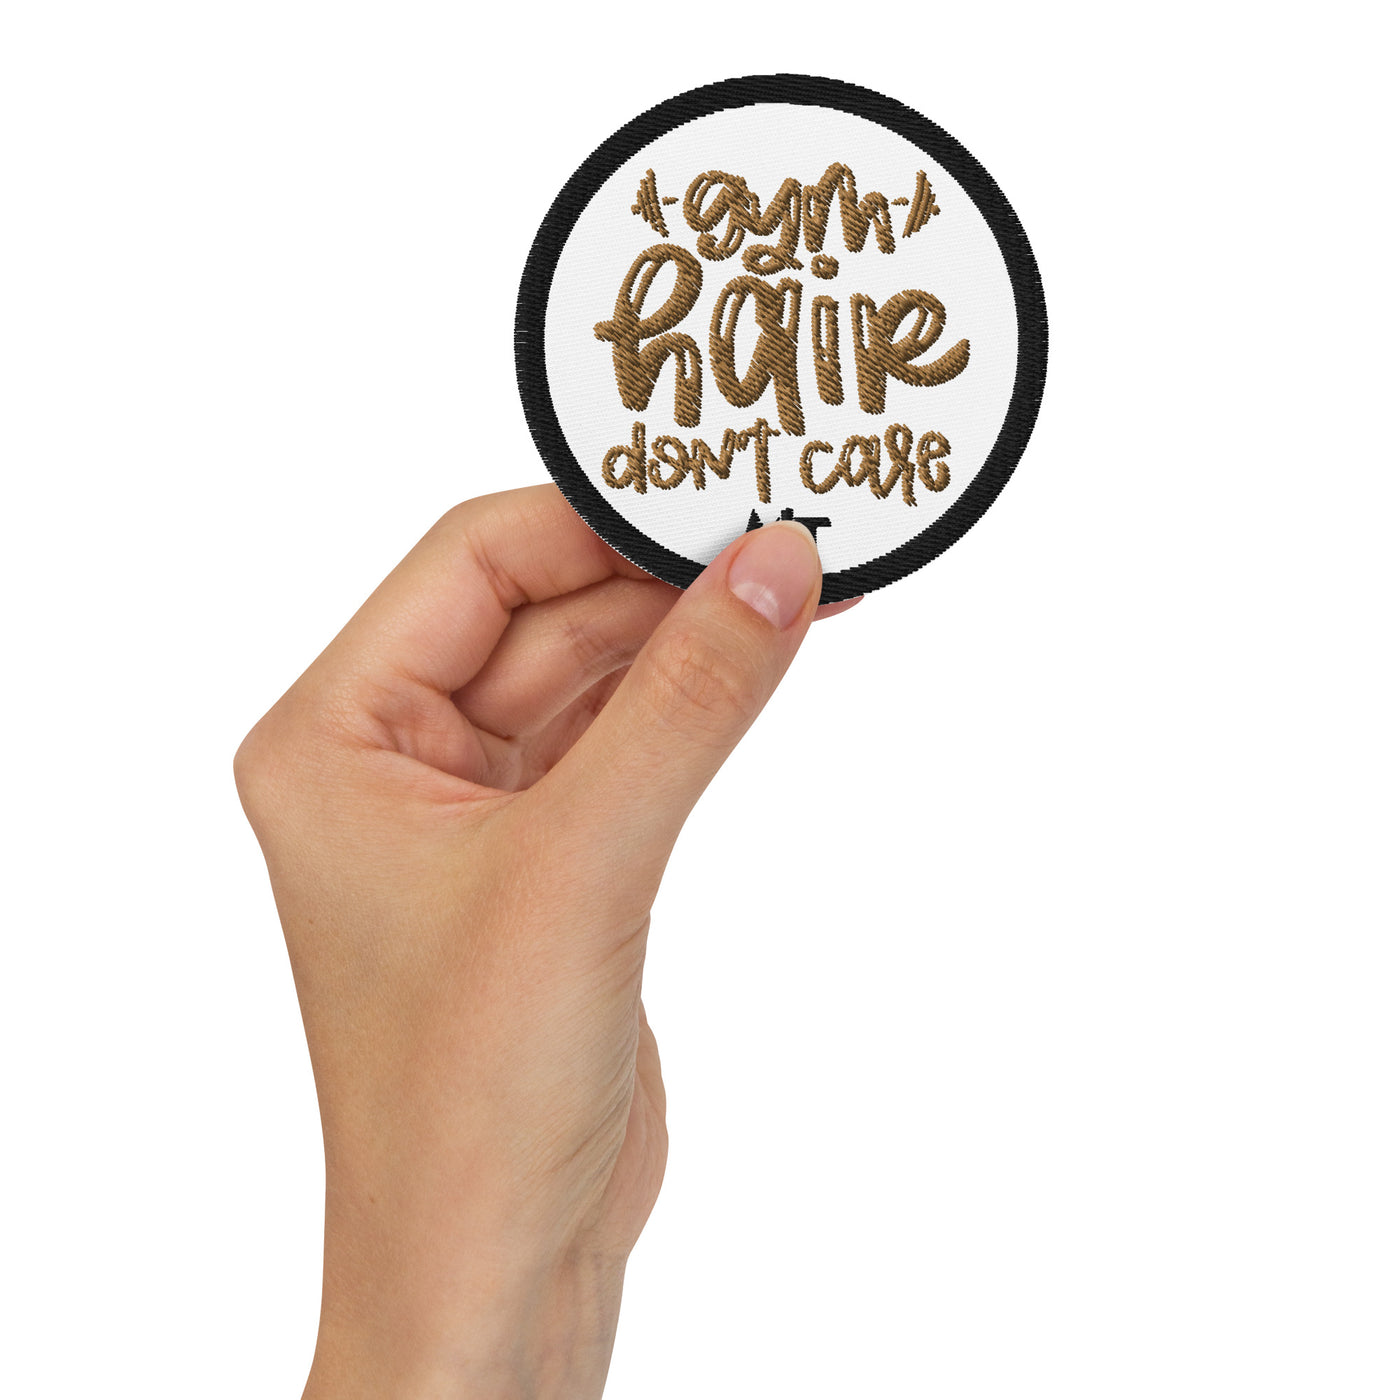 Gym Hair Don't Care - Embroidered patches